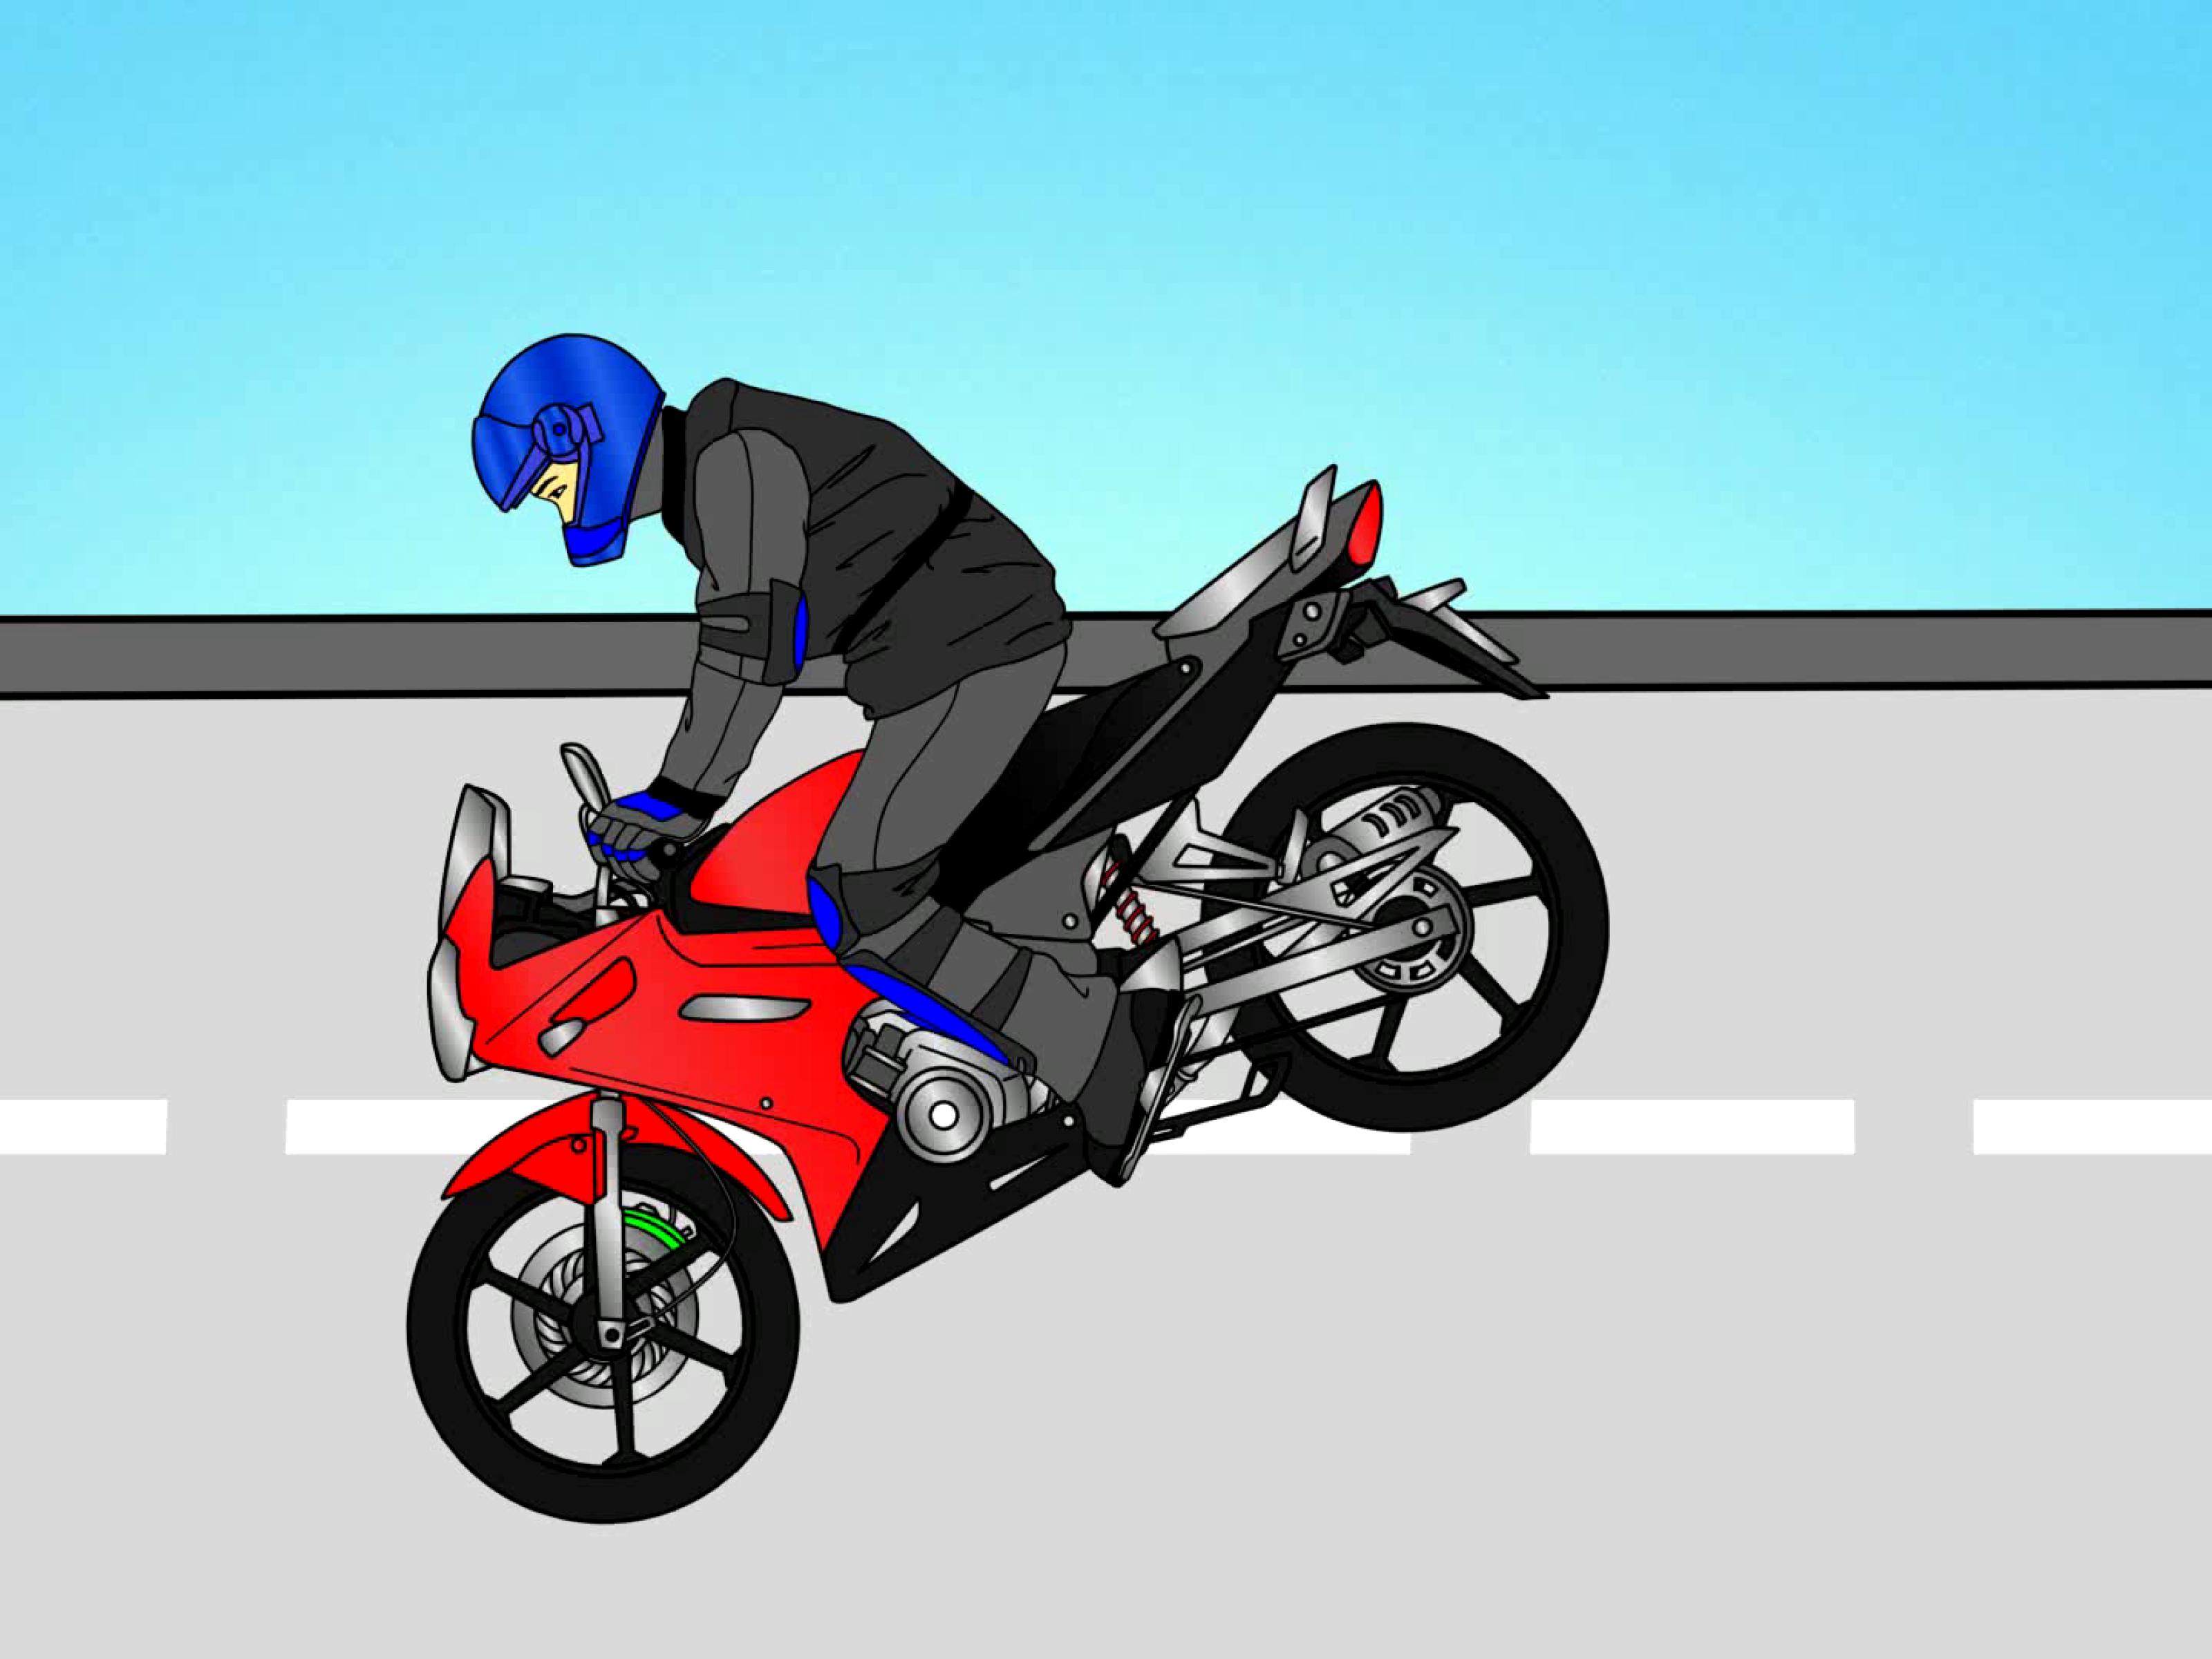 How To Do A Stoppie On Motorcycle Steps With Pictures